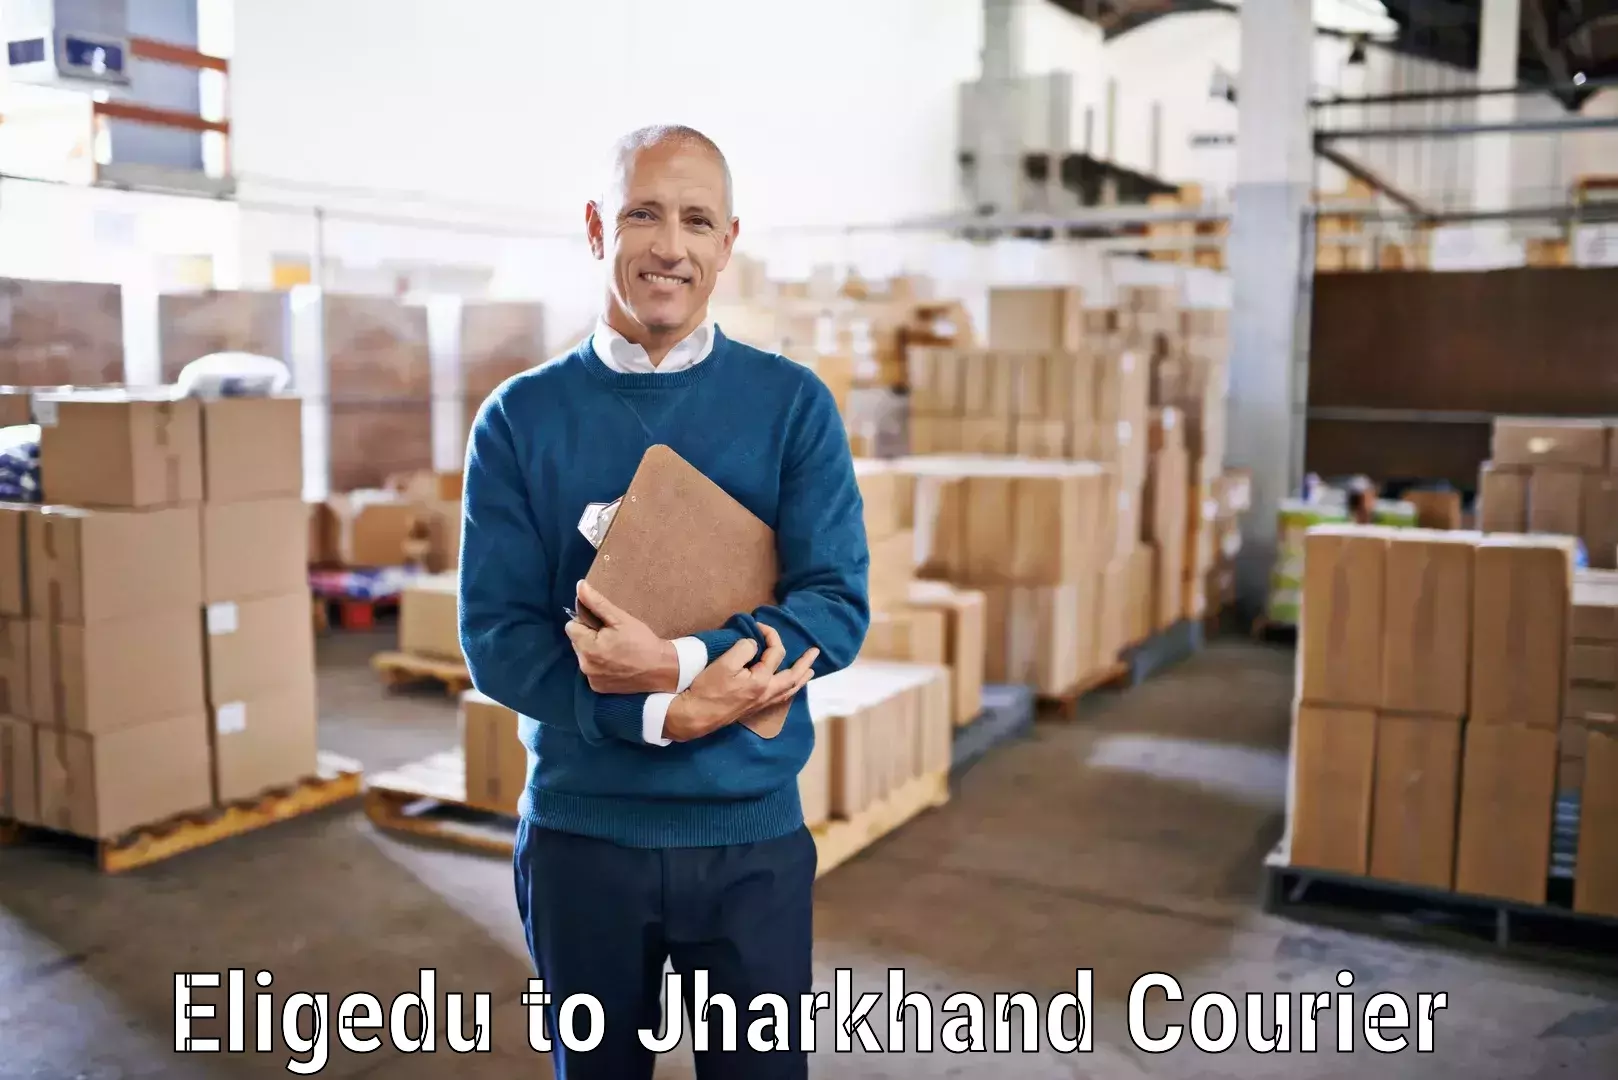 Courier service innovation Eligedu to Chandil